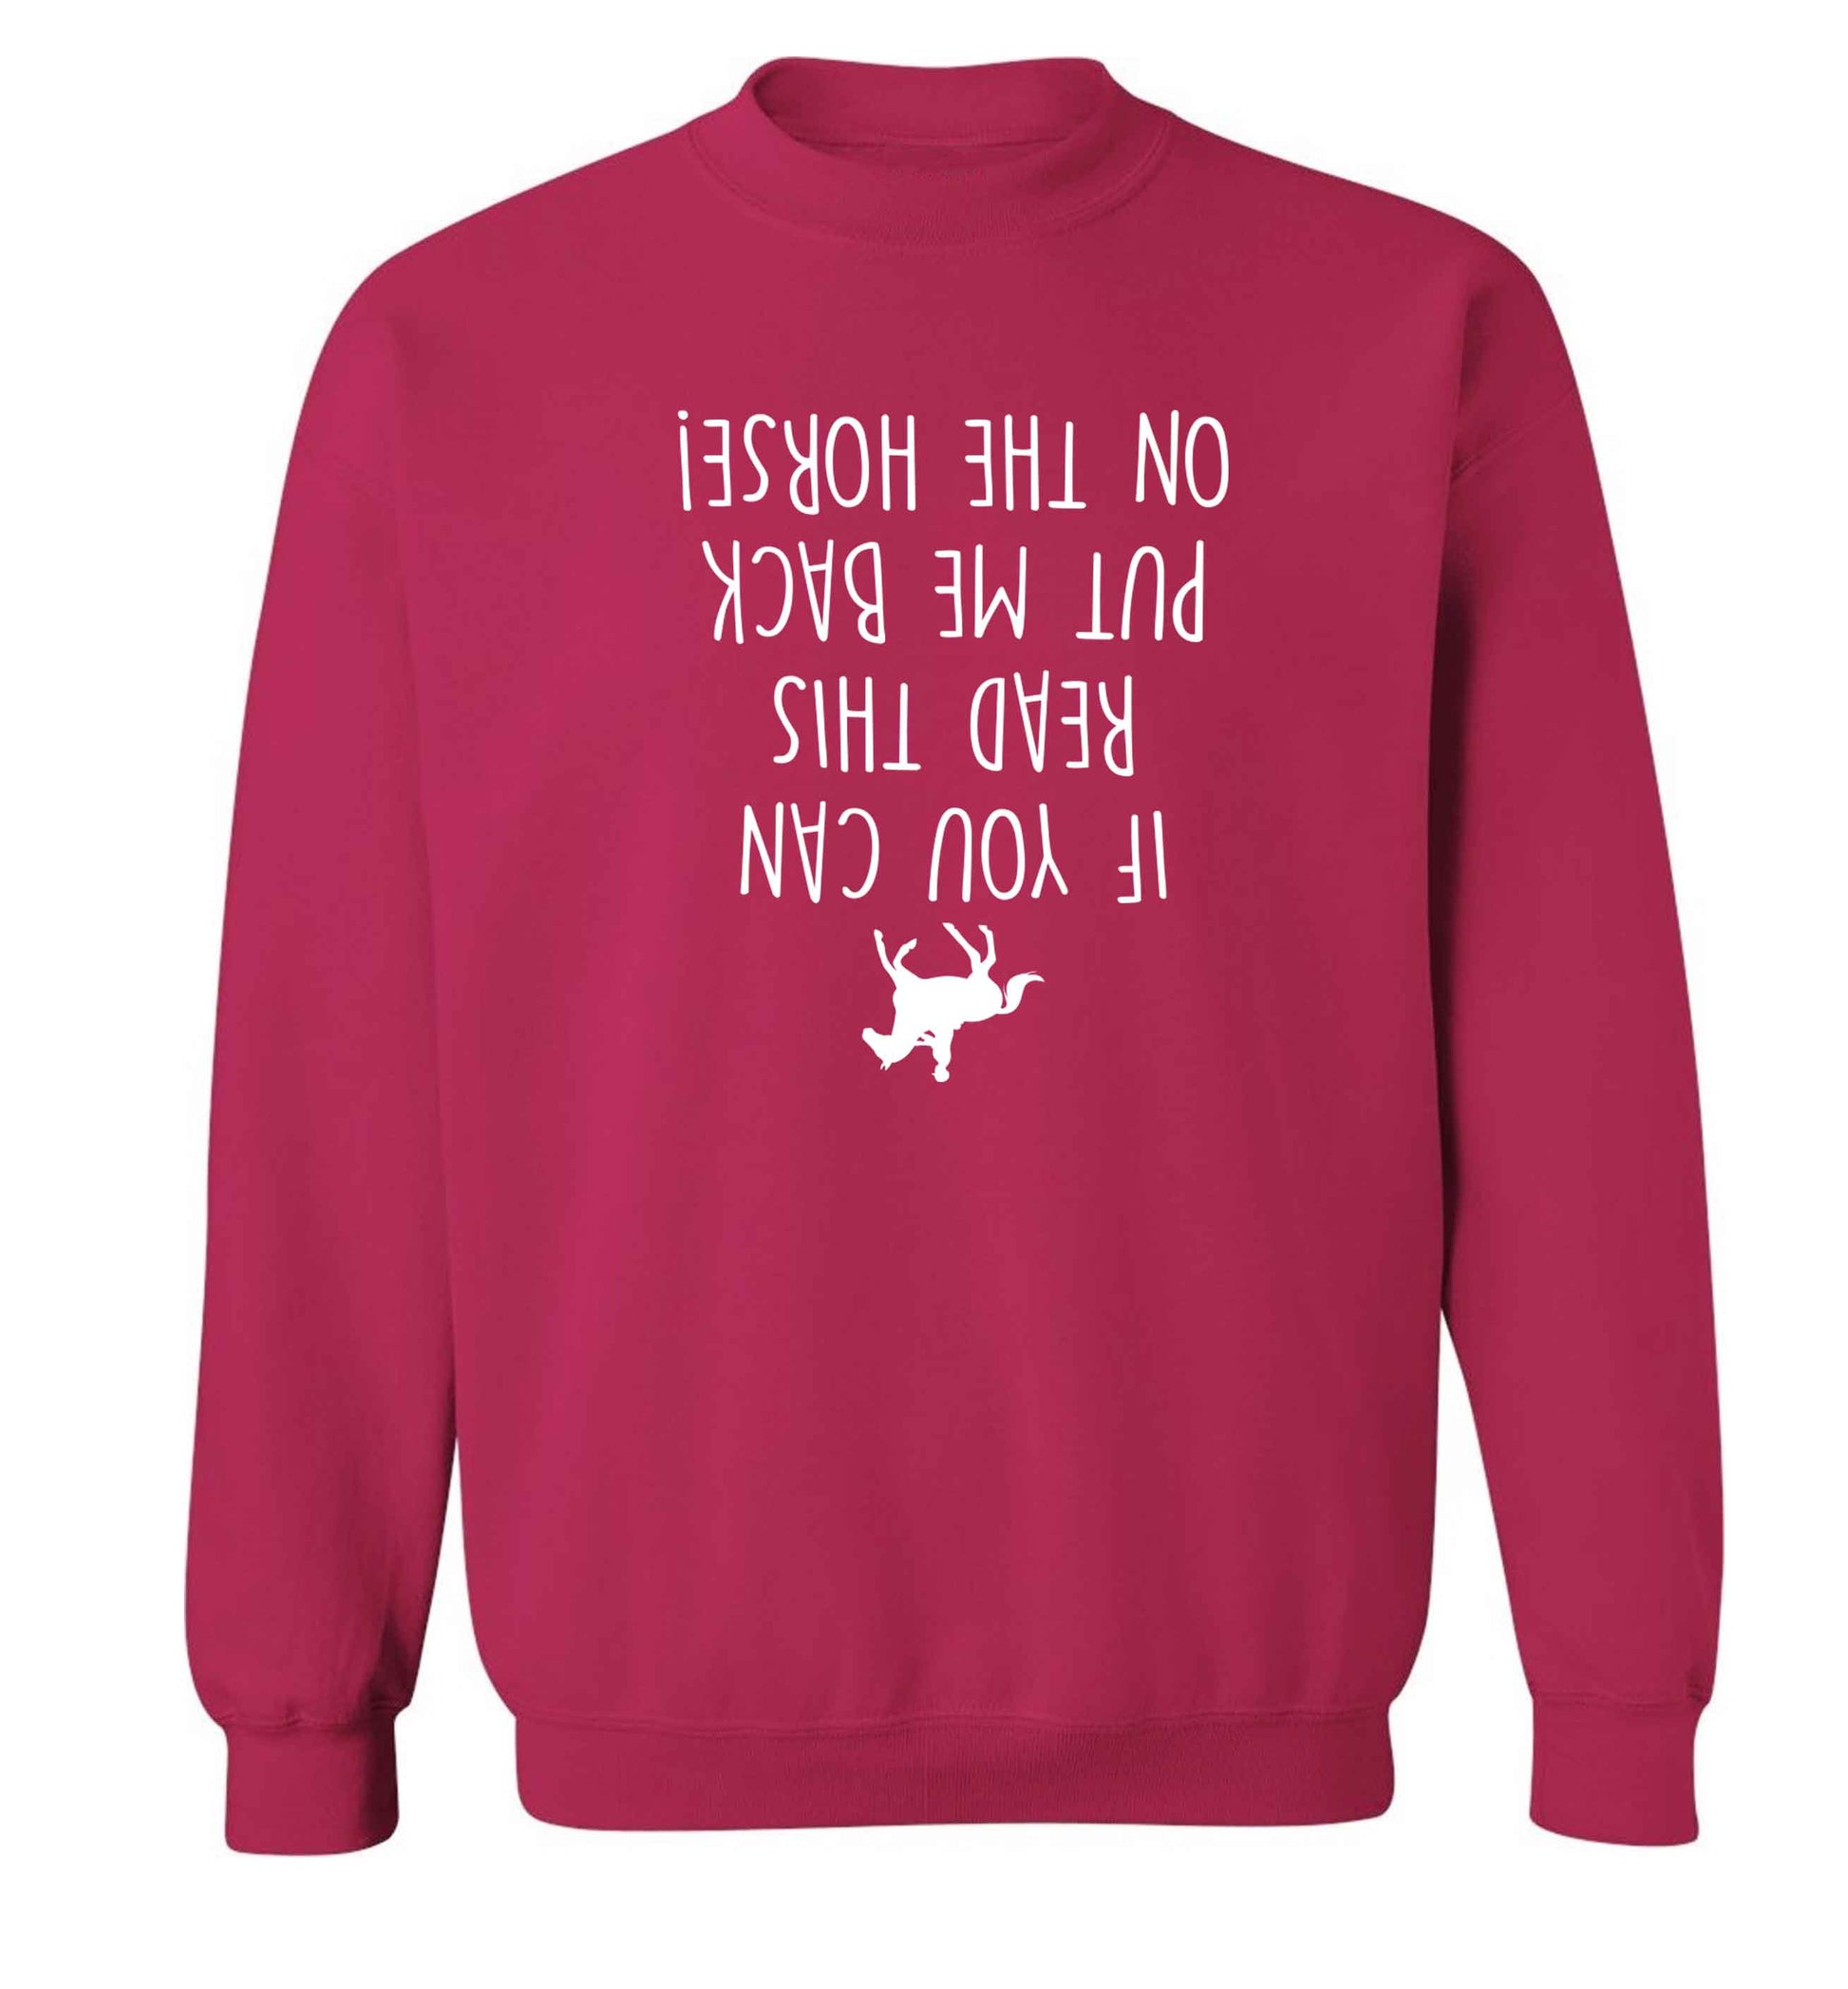 If you can read this put me back on the horse adult's unisex pink sweater 2XL